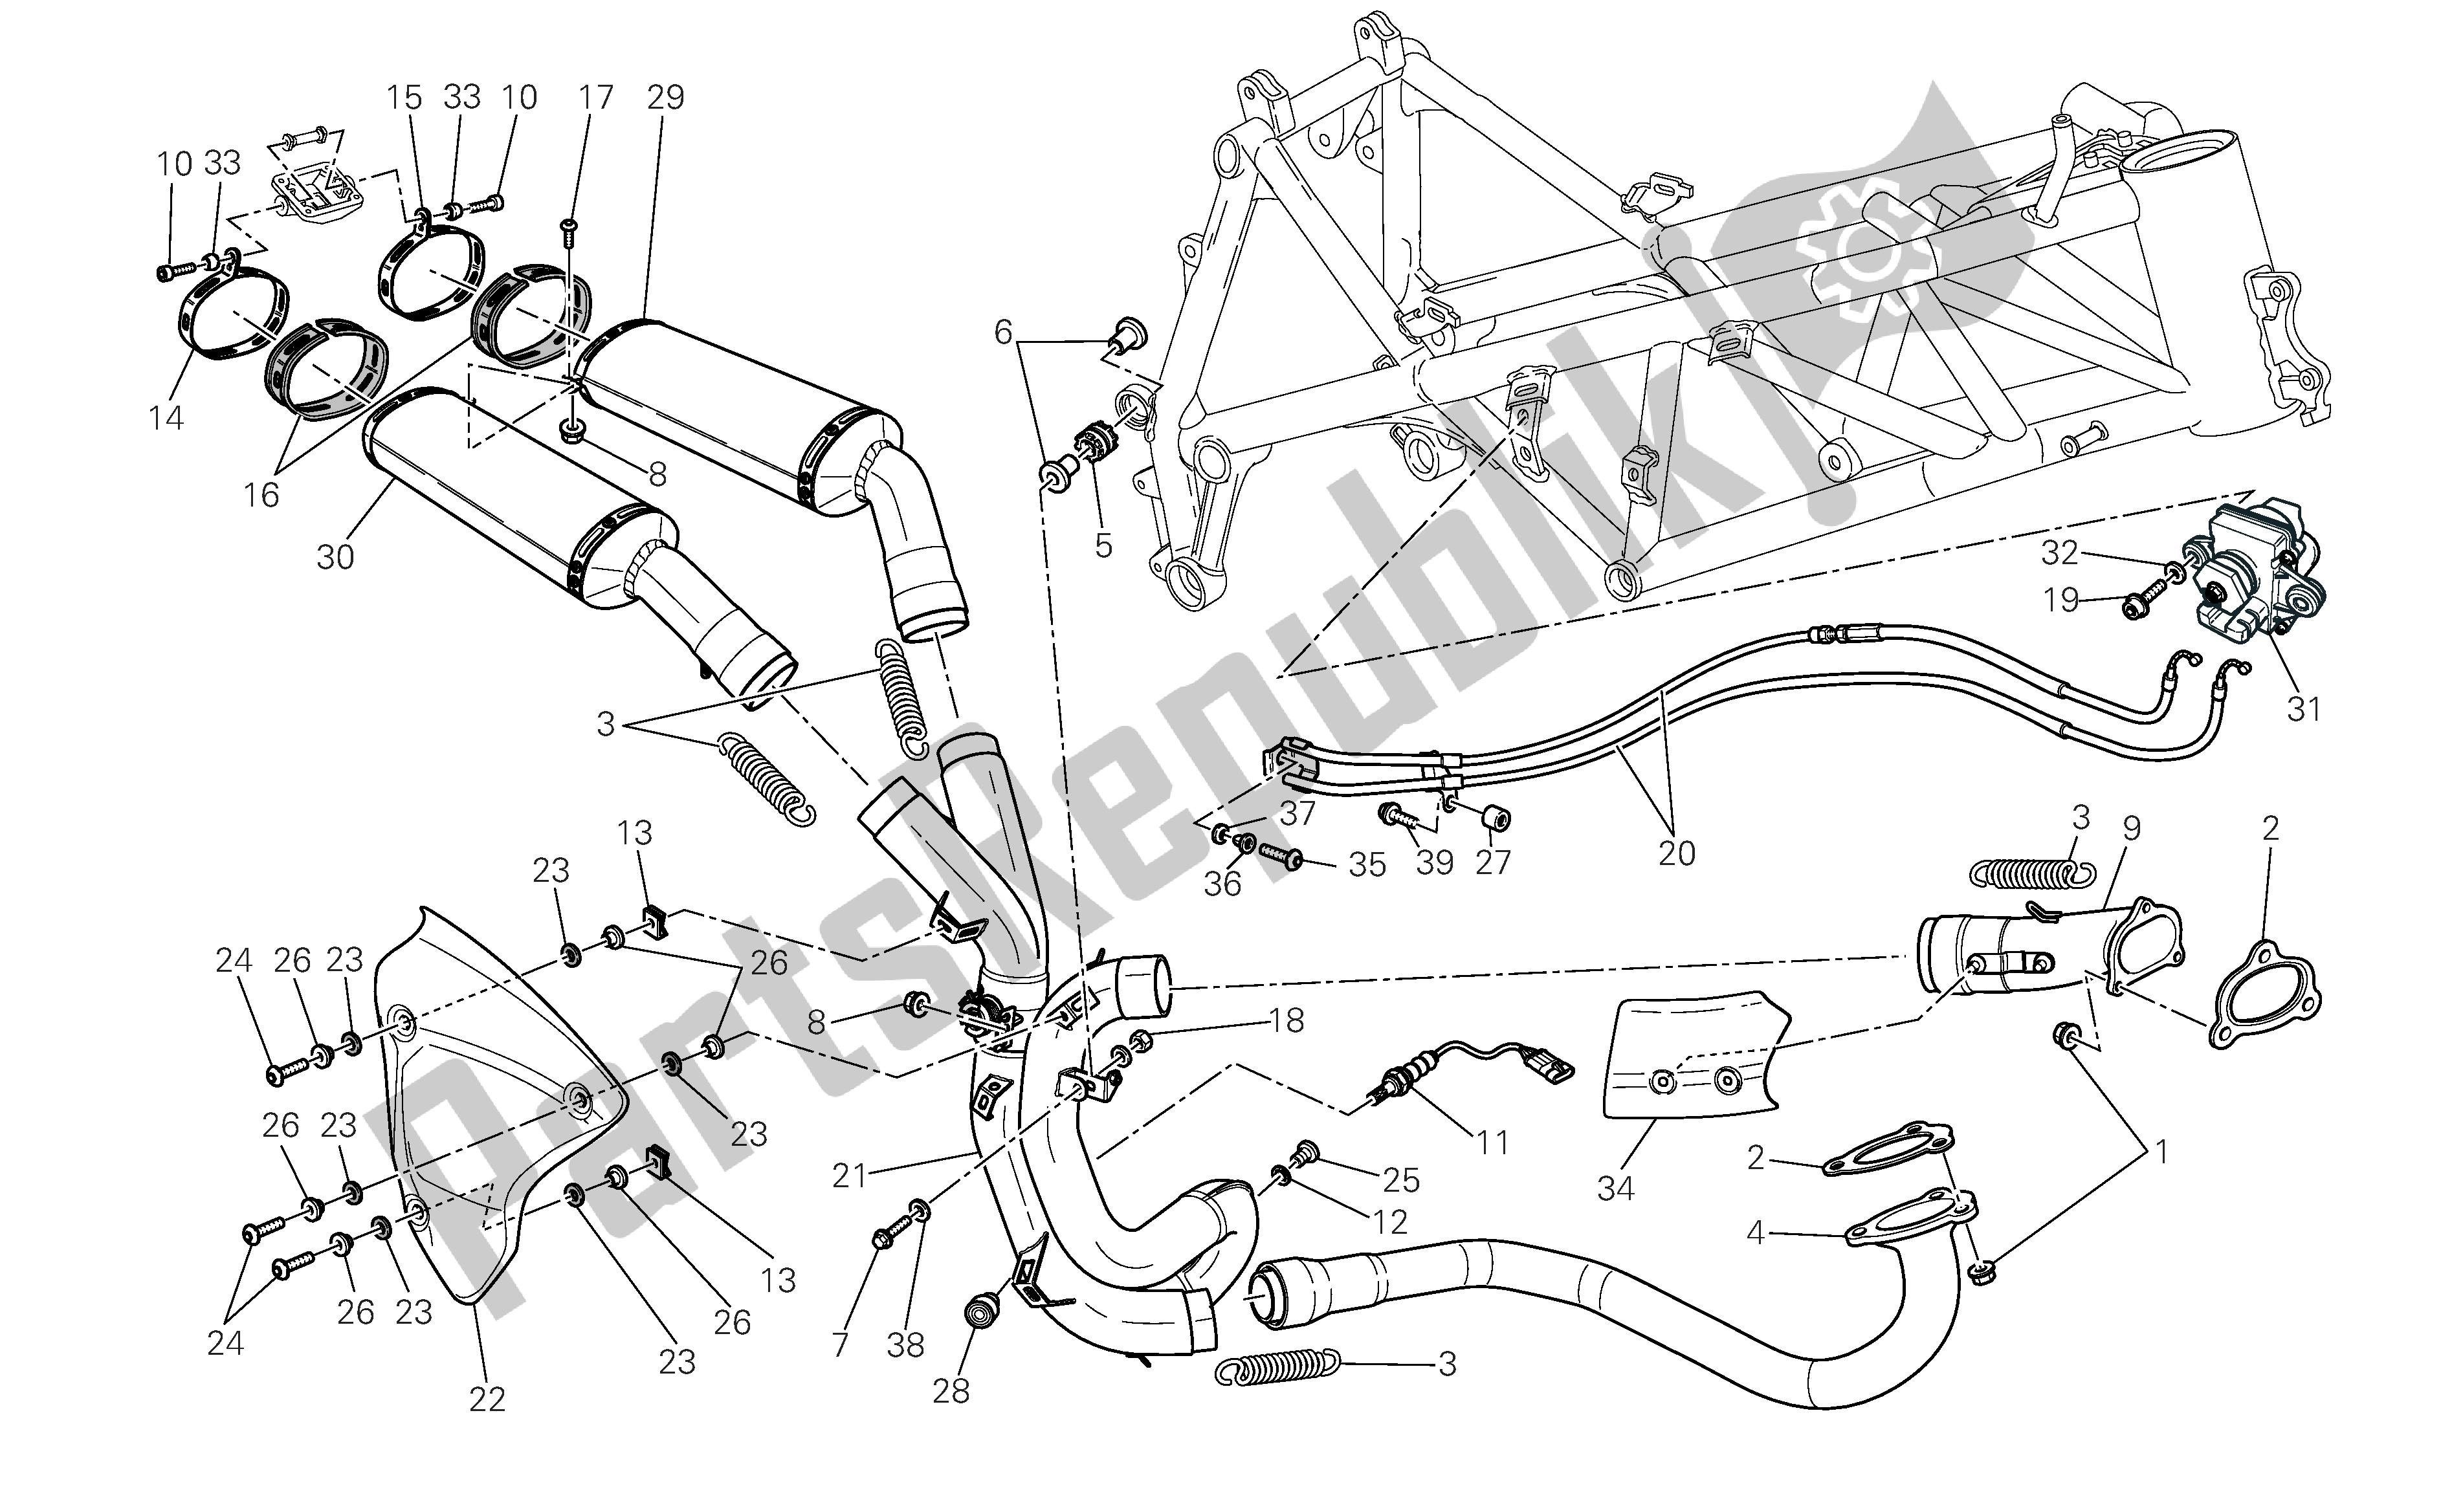 All parts for the Exhaust Syst Em of the Ducati 1098 2007